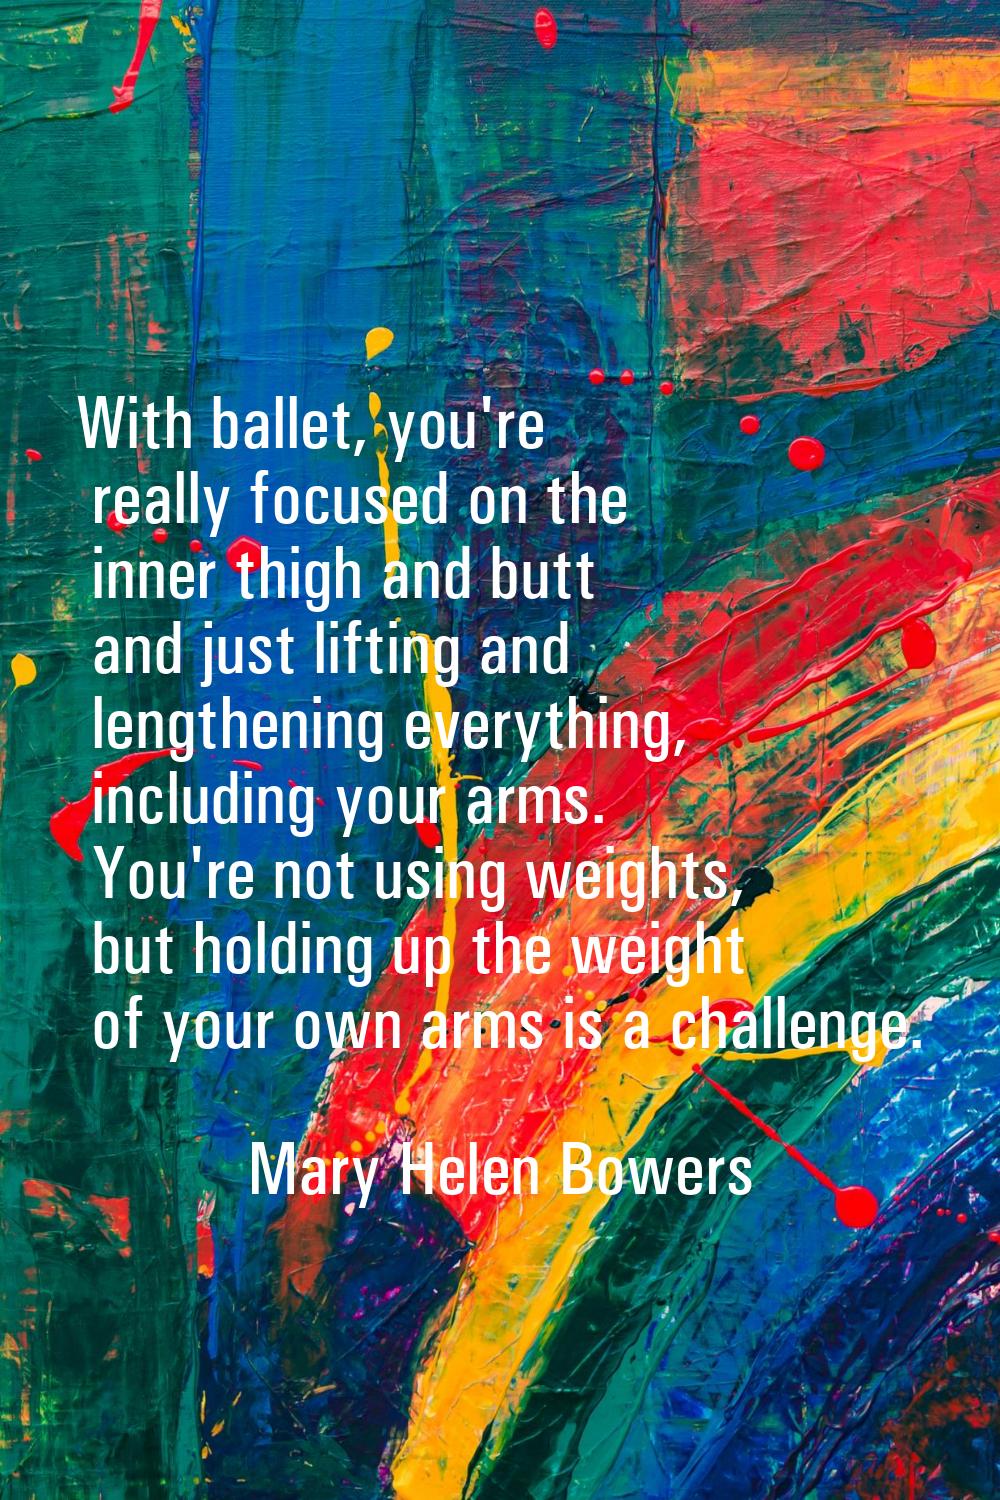 With ballet, you're really focused on the inner thigh and butt and just lifting and lengthening eve